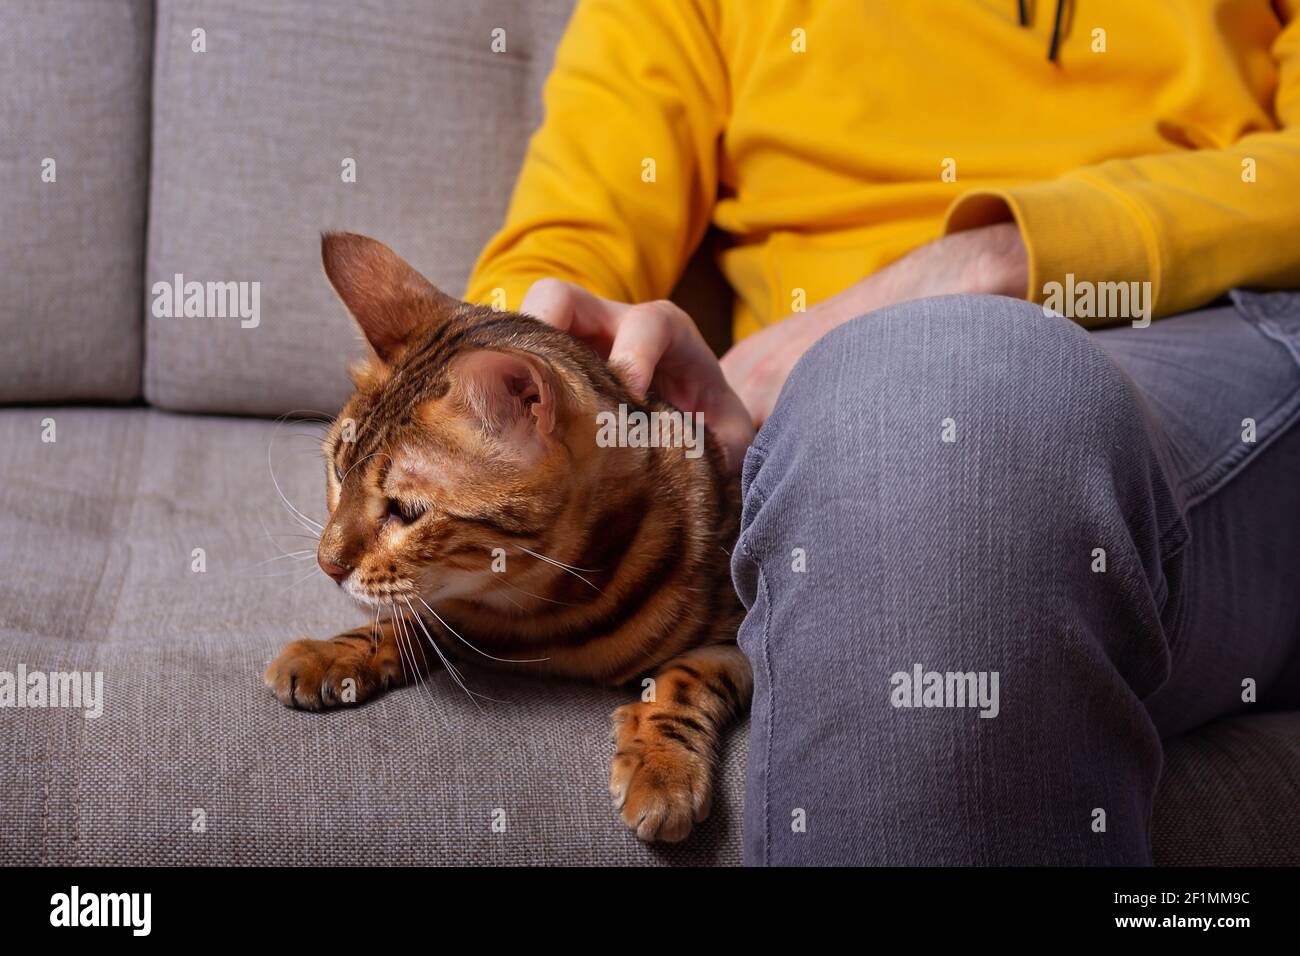 Unrecognizble caucasian young man sitting on couch with his bengal cat. Yellow and grey colors in chlothes. Amazing spotted cat with beloved owner.  Stock Photo